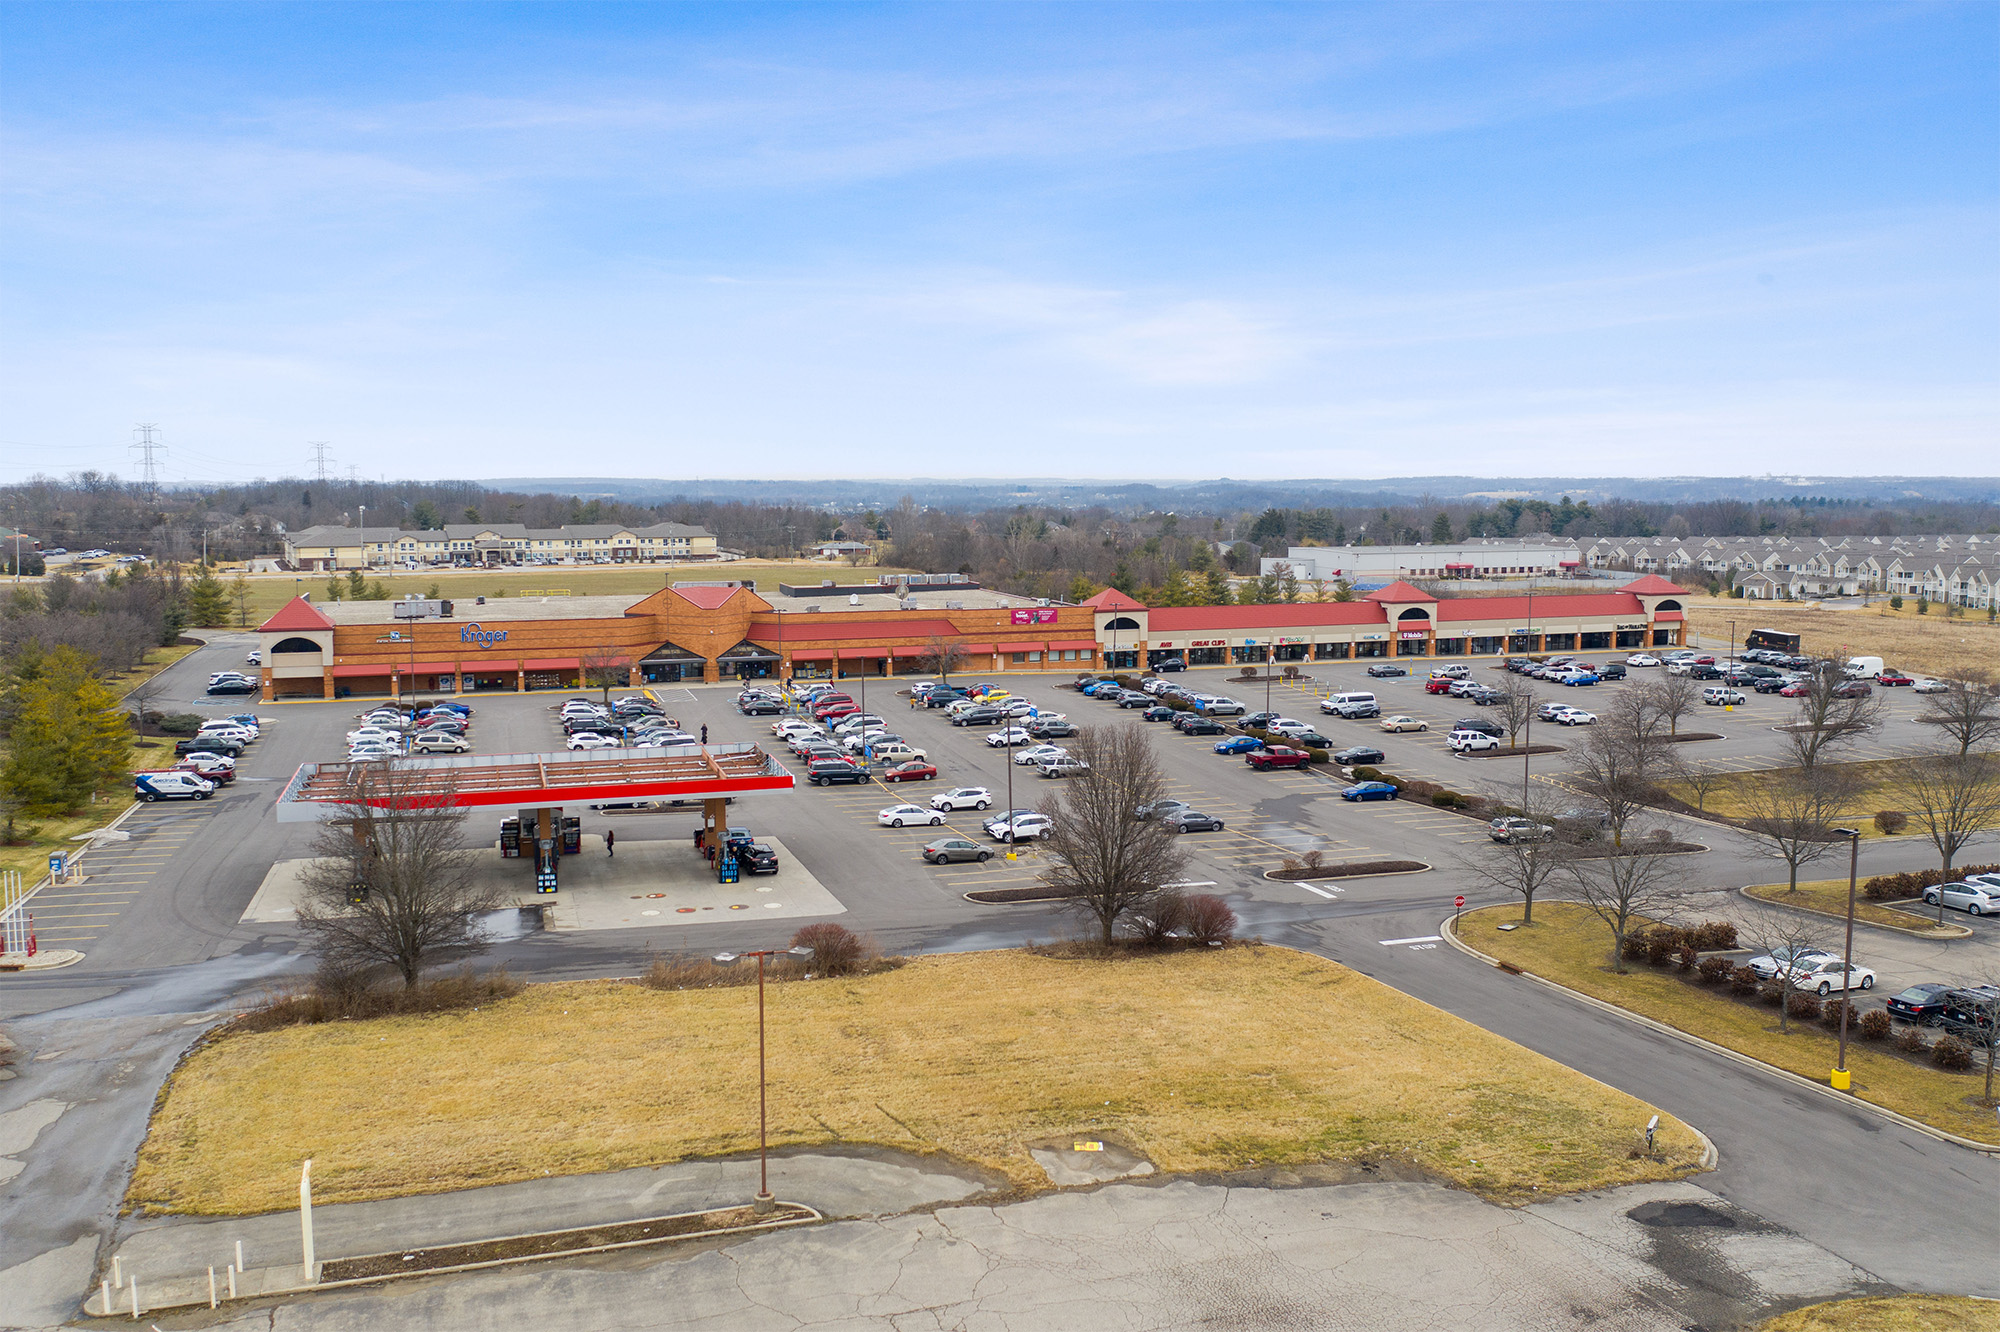 Drone view of Shoppes of Mason storefronts and Kroger gas station.